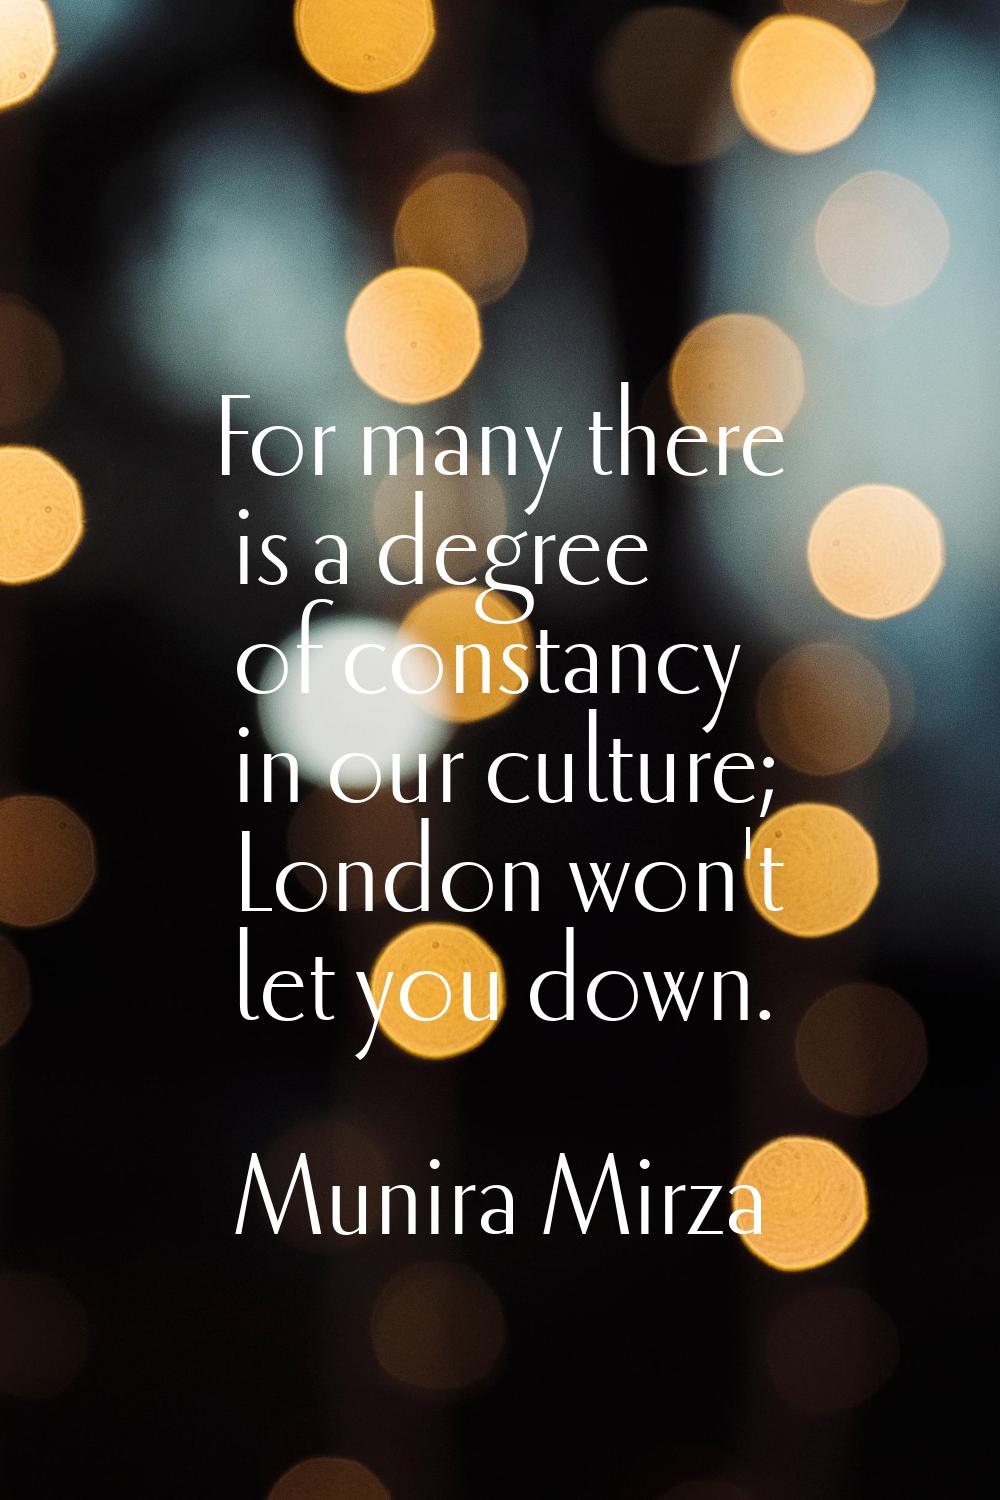 For many there is a degree of constancy in our culture; London won't let you down.